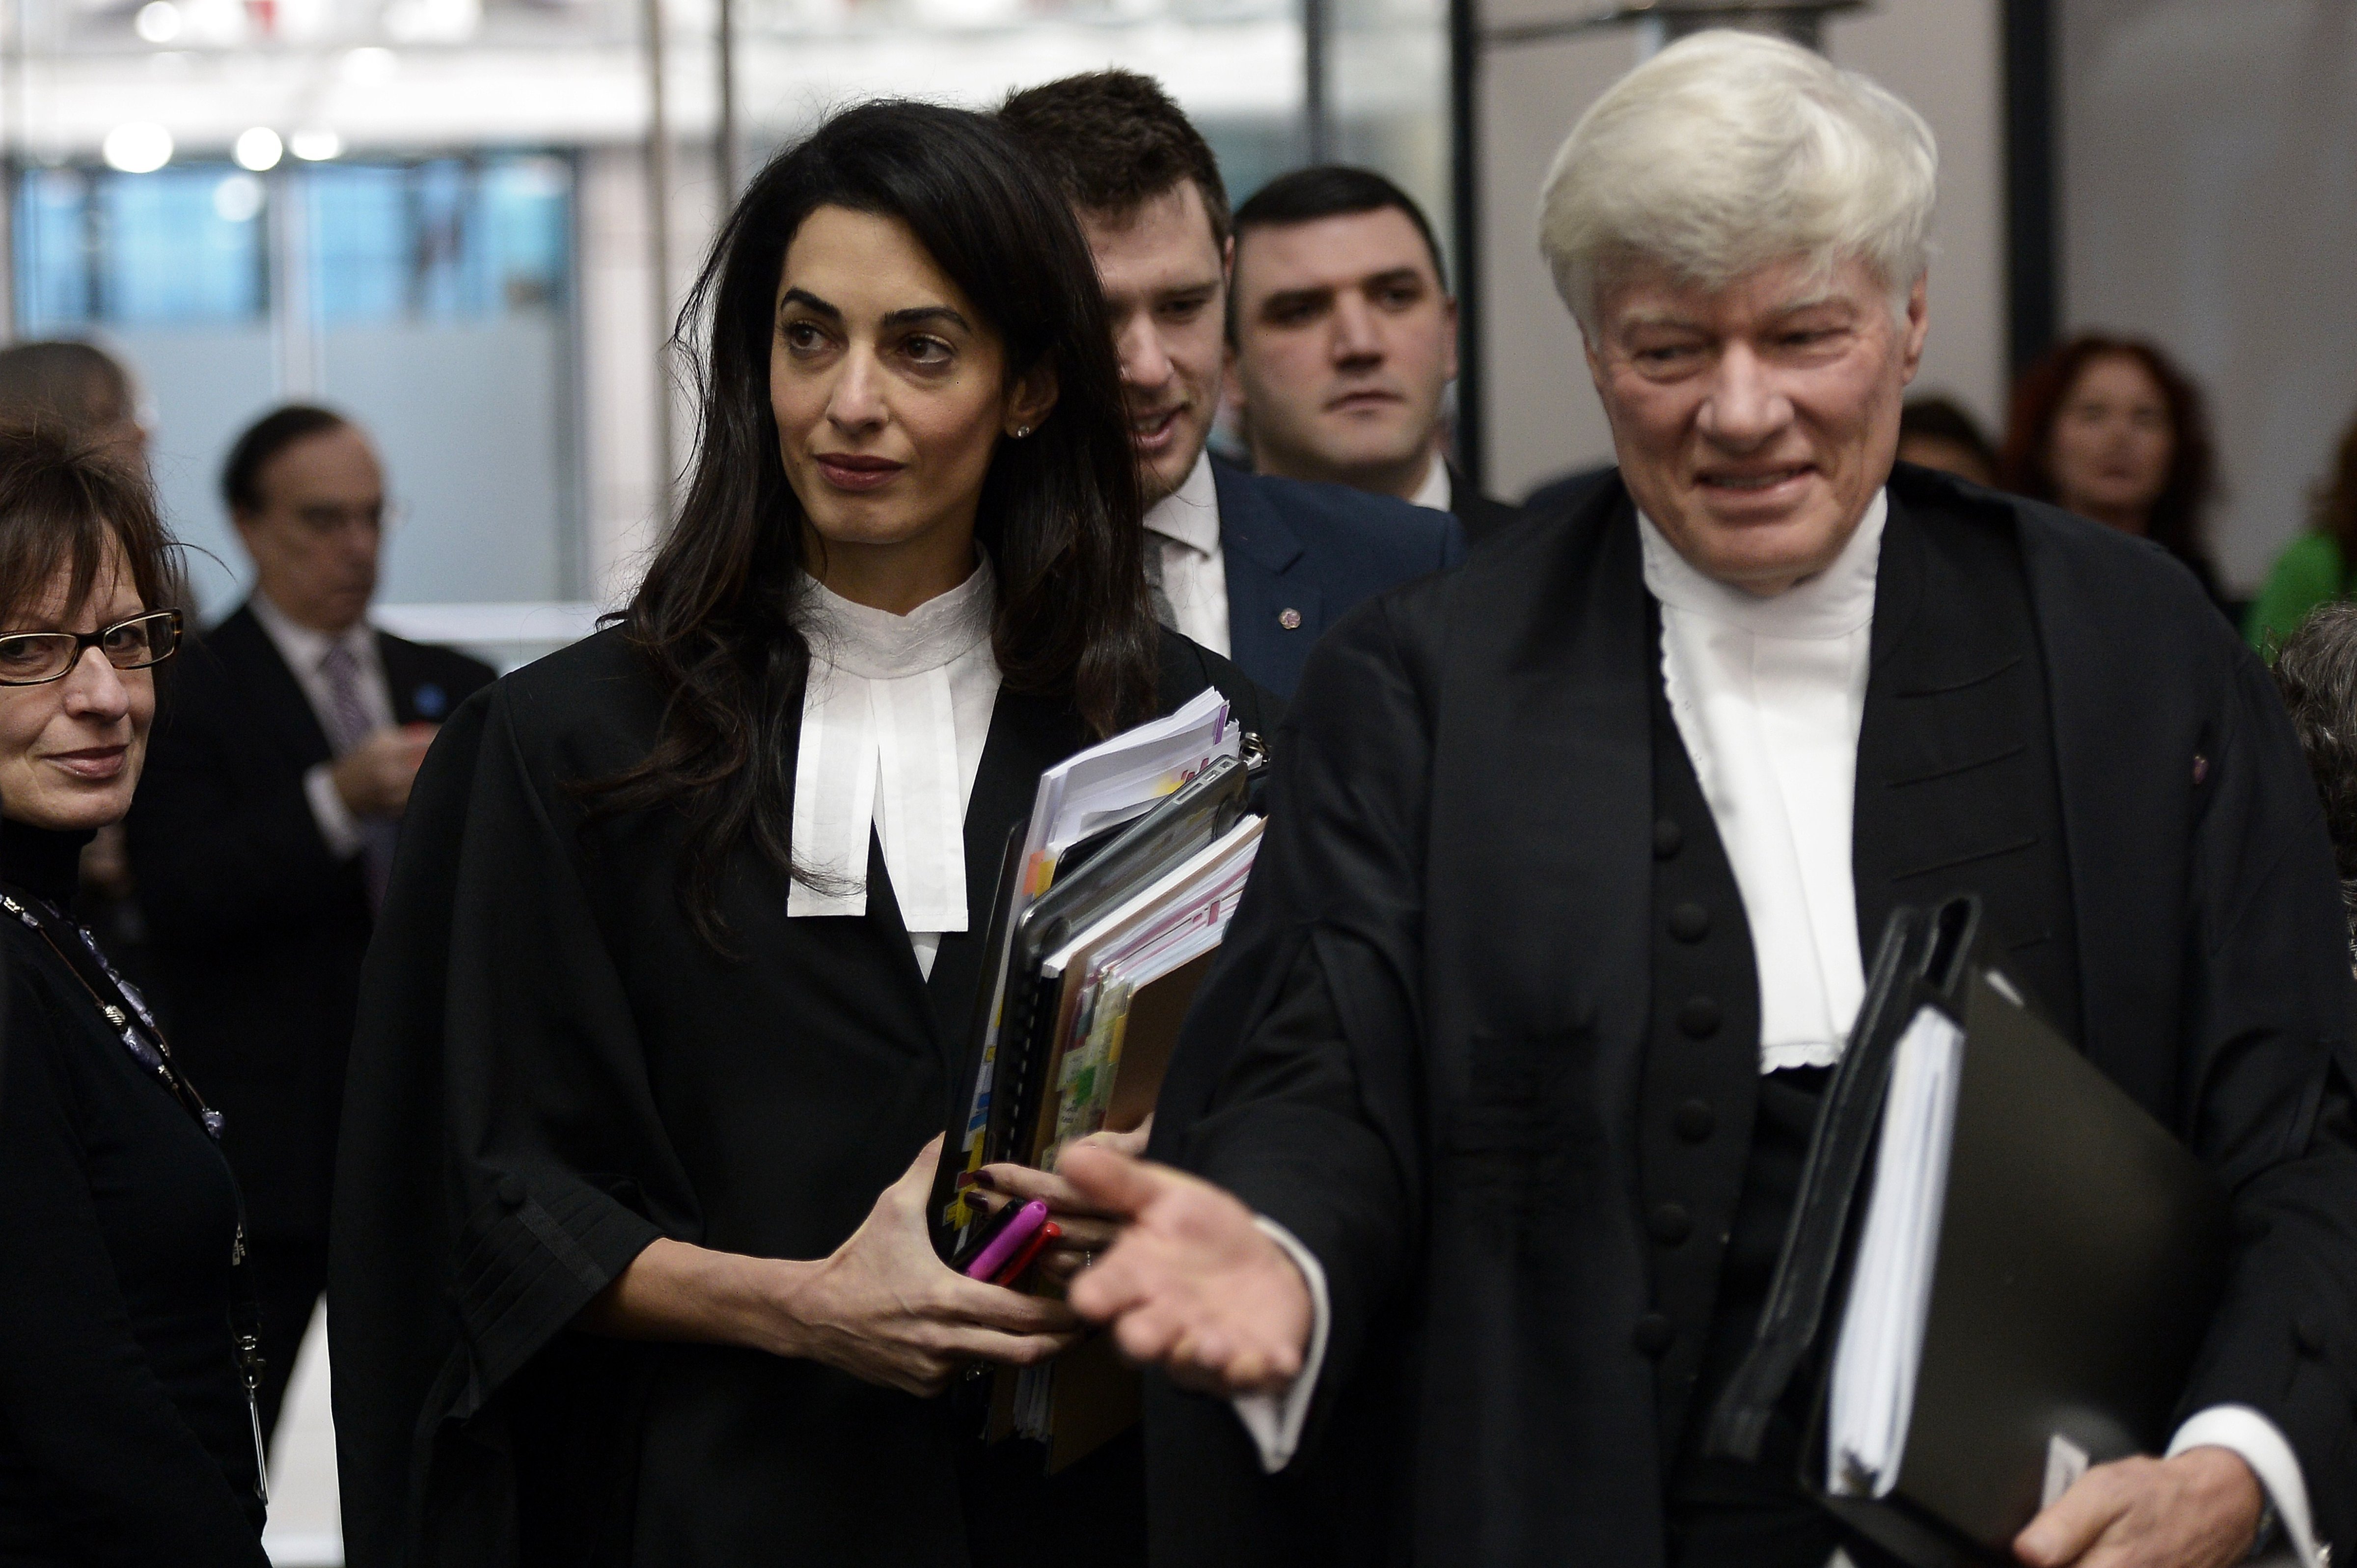 Lawyers Amal Clooney  and Geoffrey Robertso, arrive on Jan. 28, 2015 to attend the appeal hearing in Perincek case before the European Court of Human Rights in Strasbourg, France. (Frederick Florin—AFP/Getty Images)